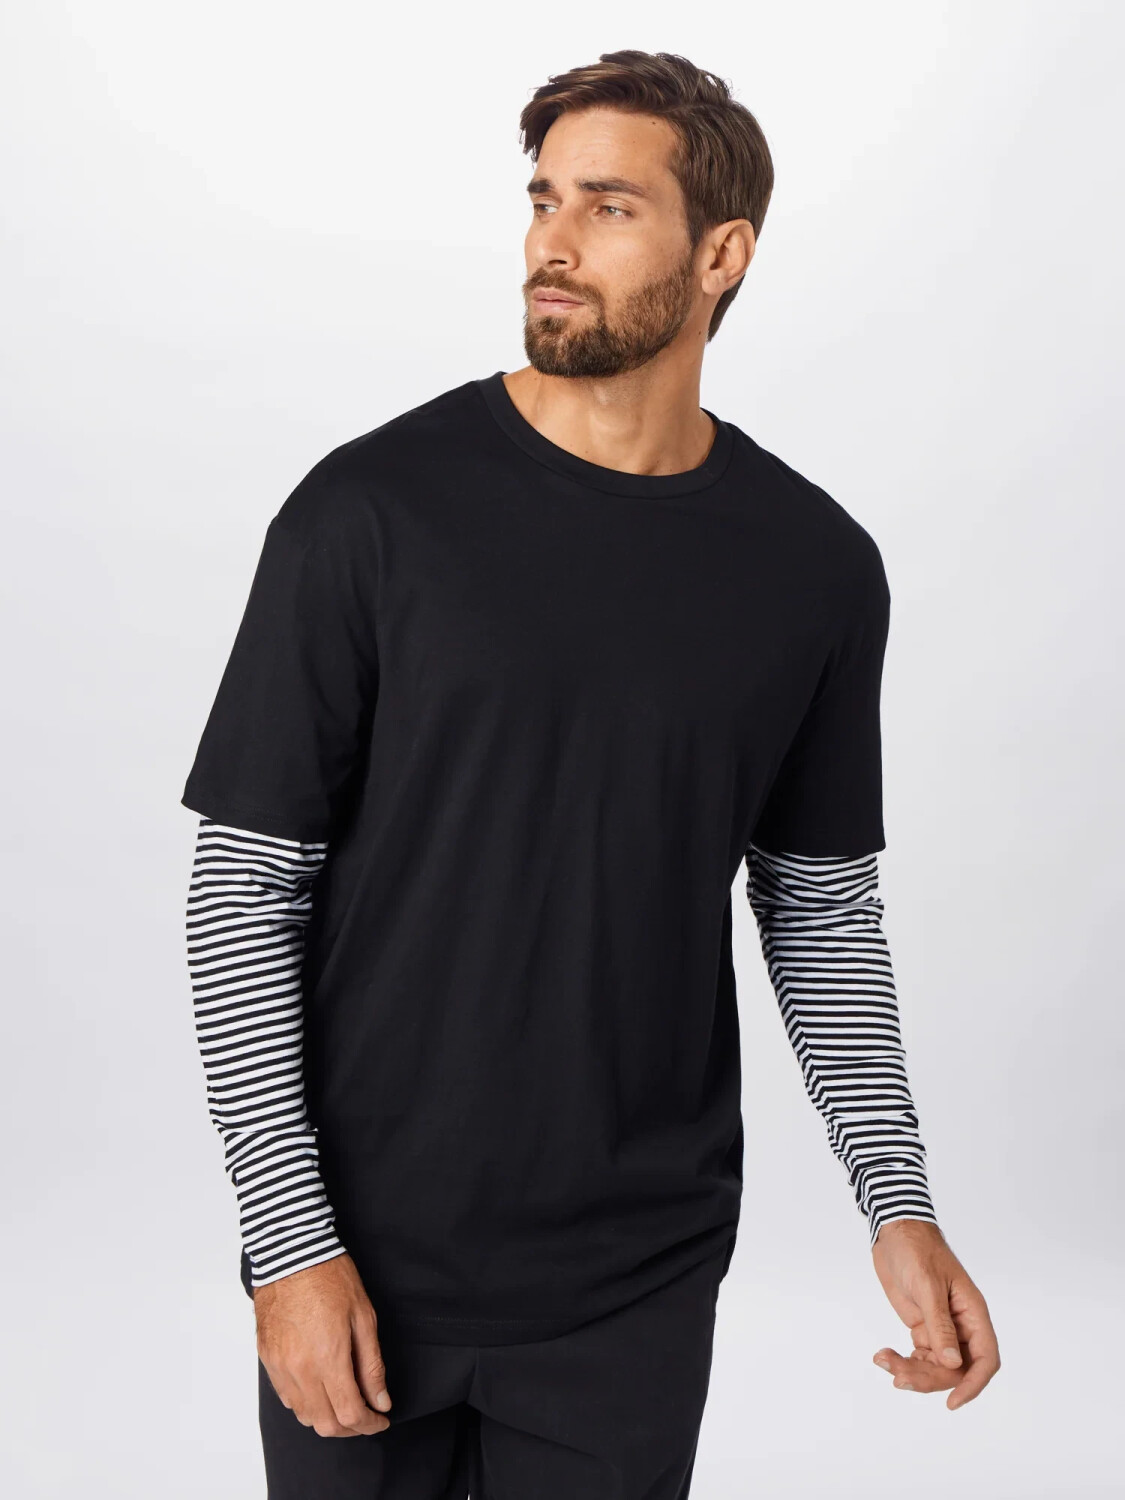 Buy Urban Classics Oversized – Striped £11.99 black LS Tee Layer (TB3498) Deals from (Today) on Best Double